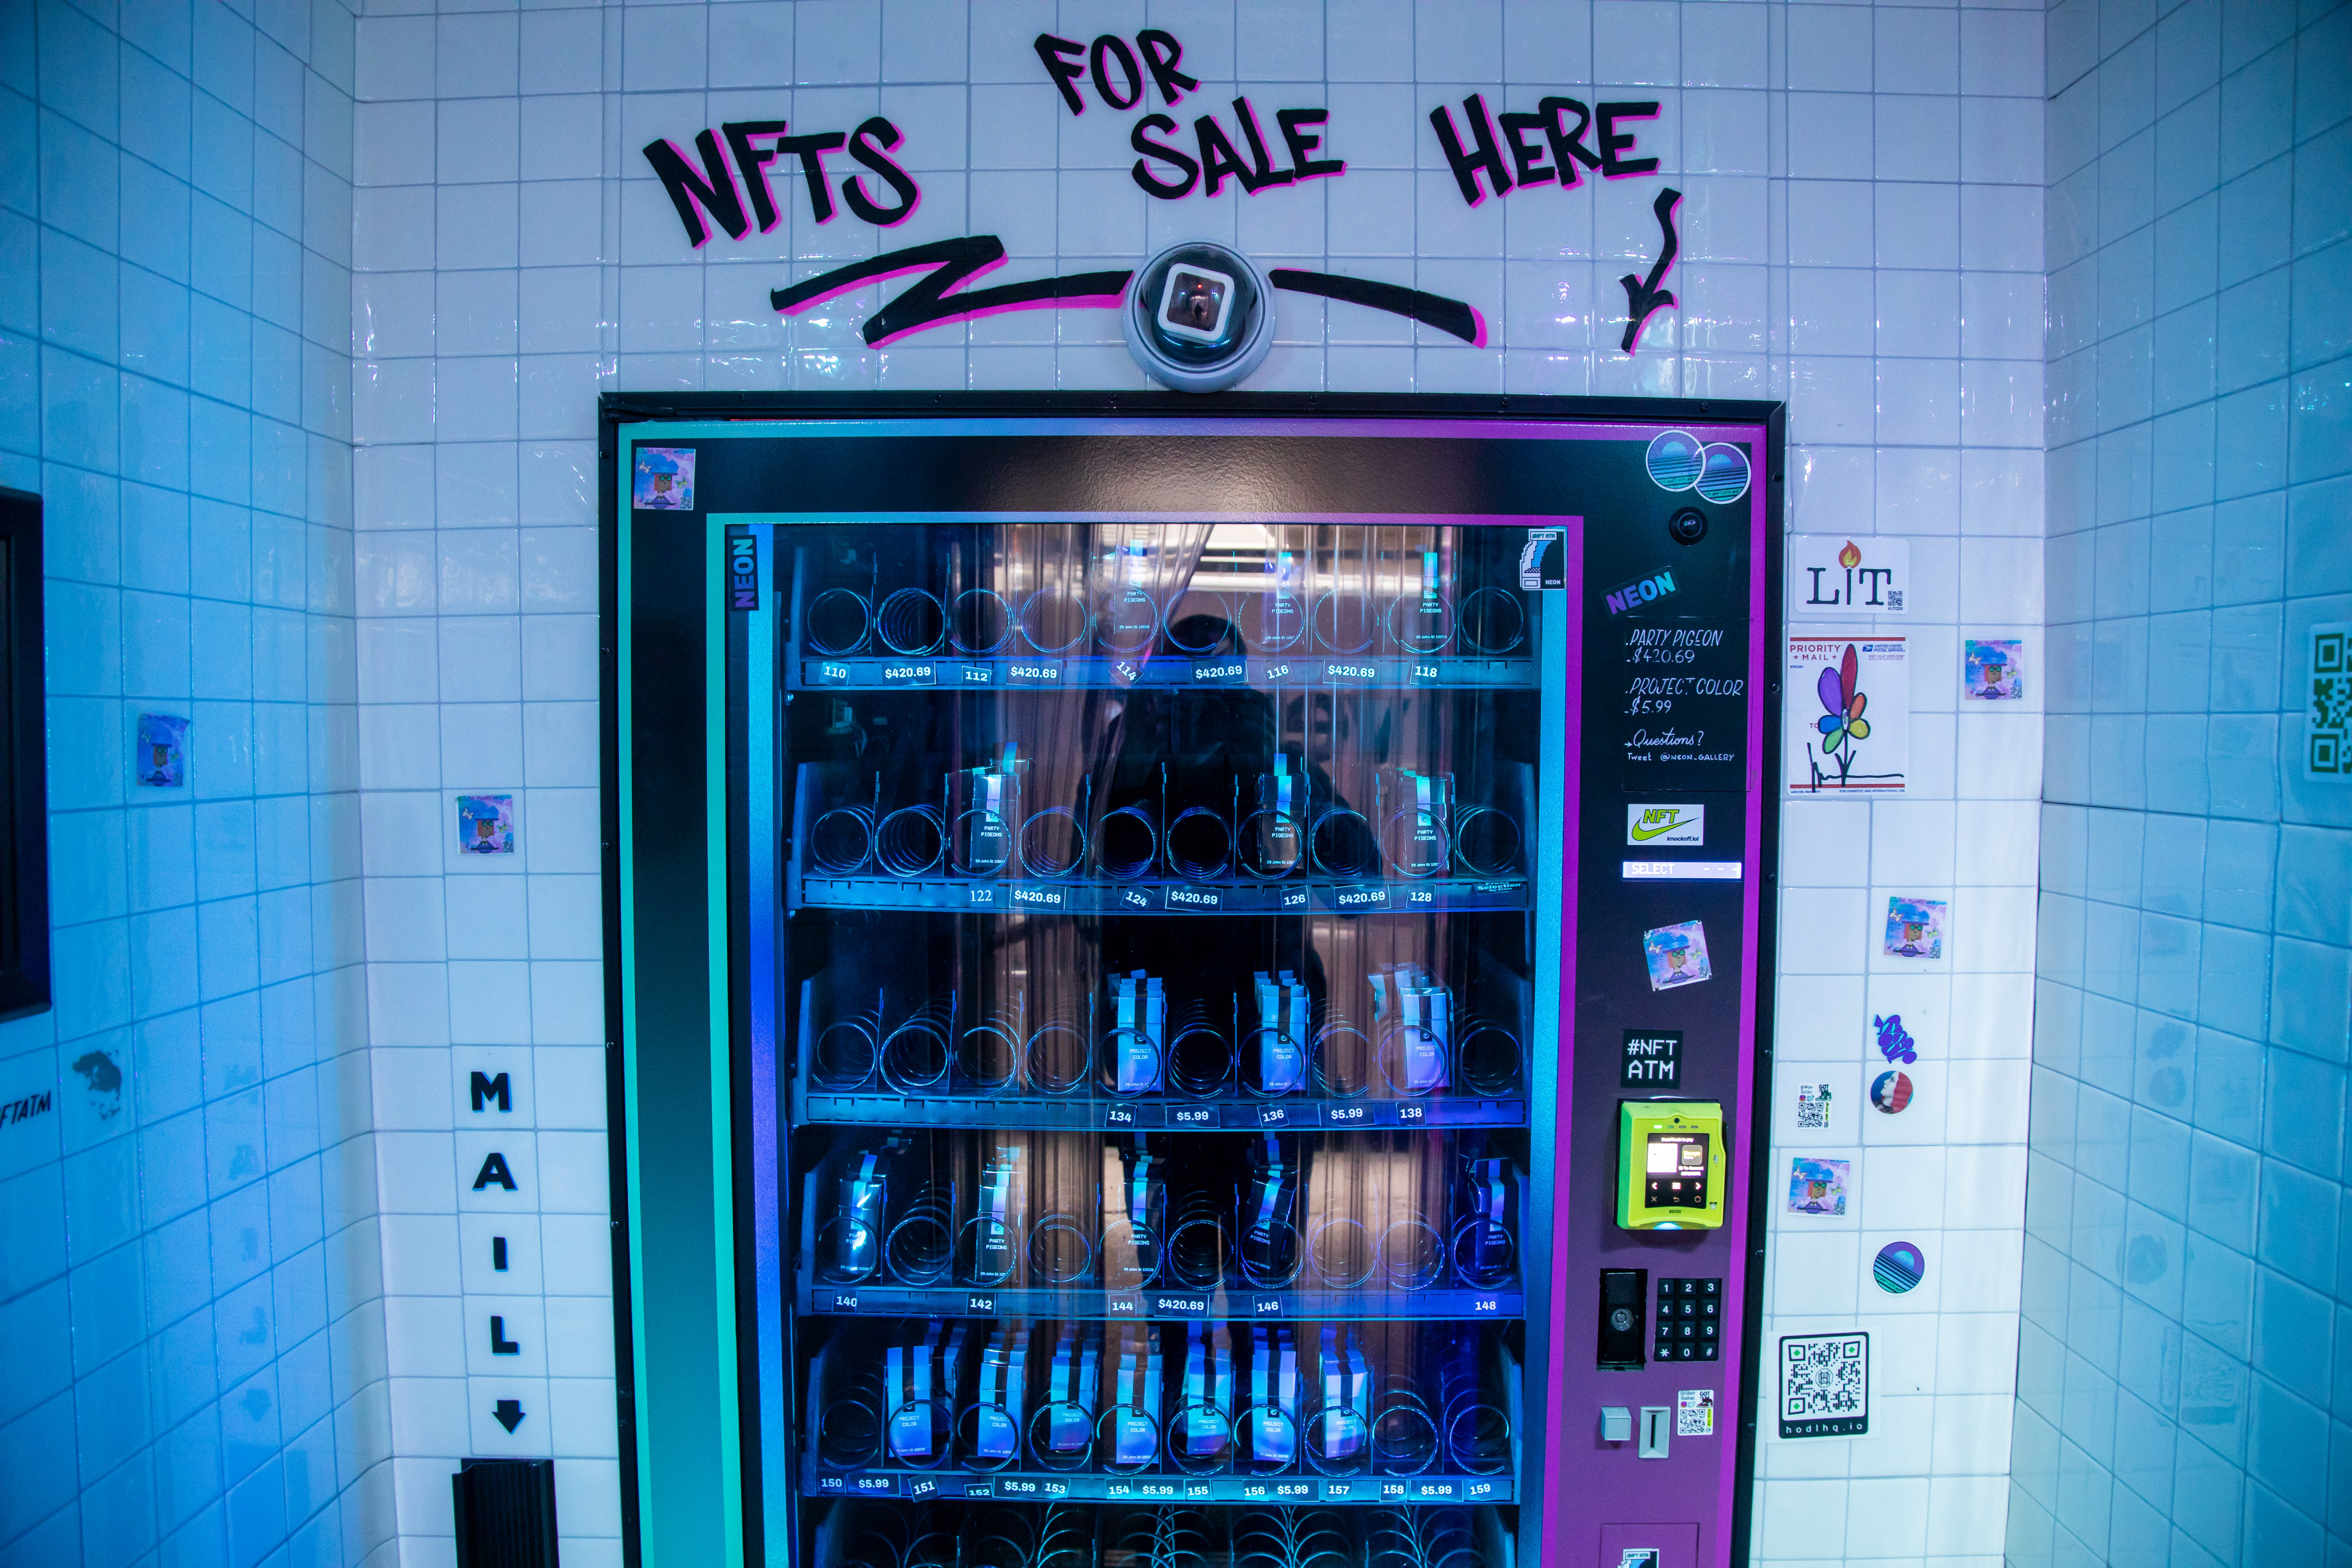 The world’s first NFT vending machine, installed in New York by NFT marketplace Neon, is seen on March 15. Photo: Bloomberg